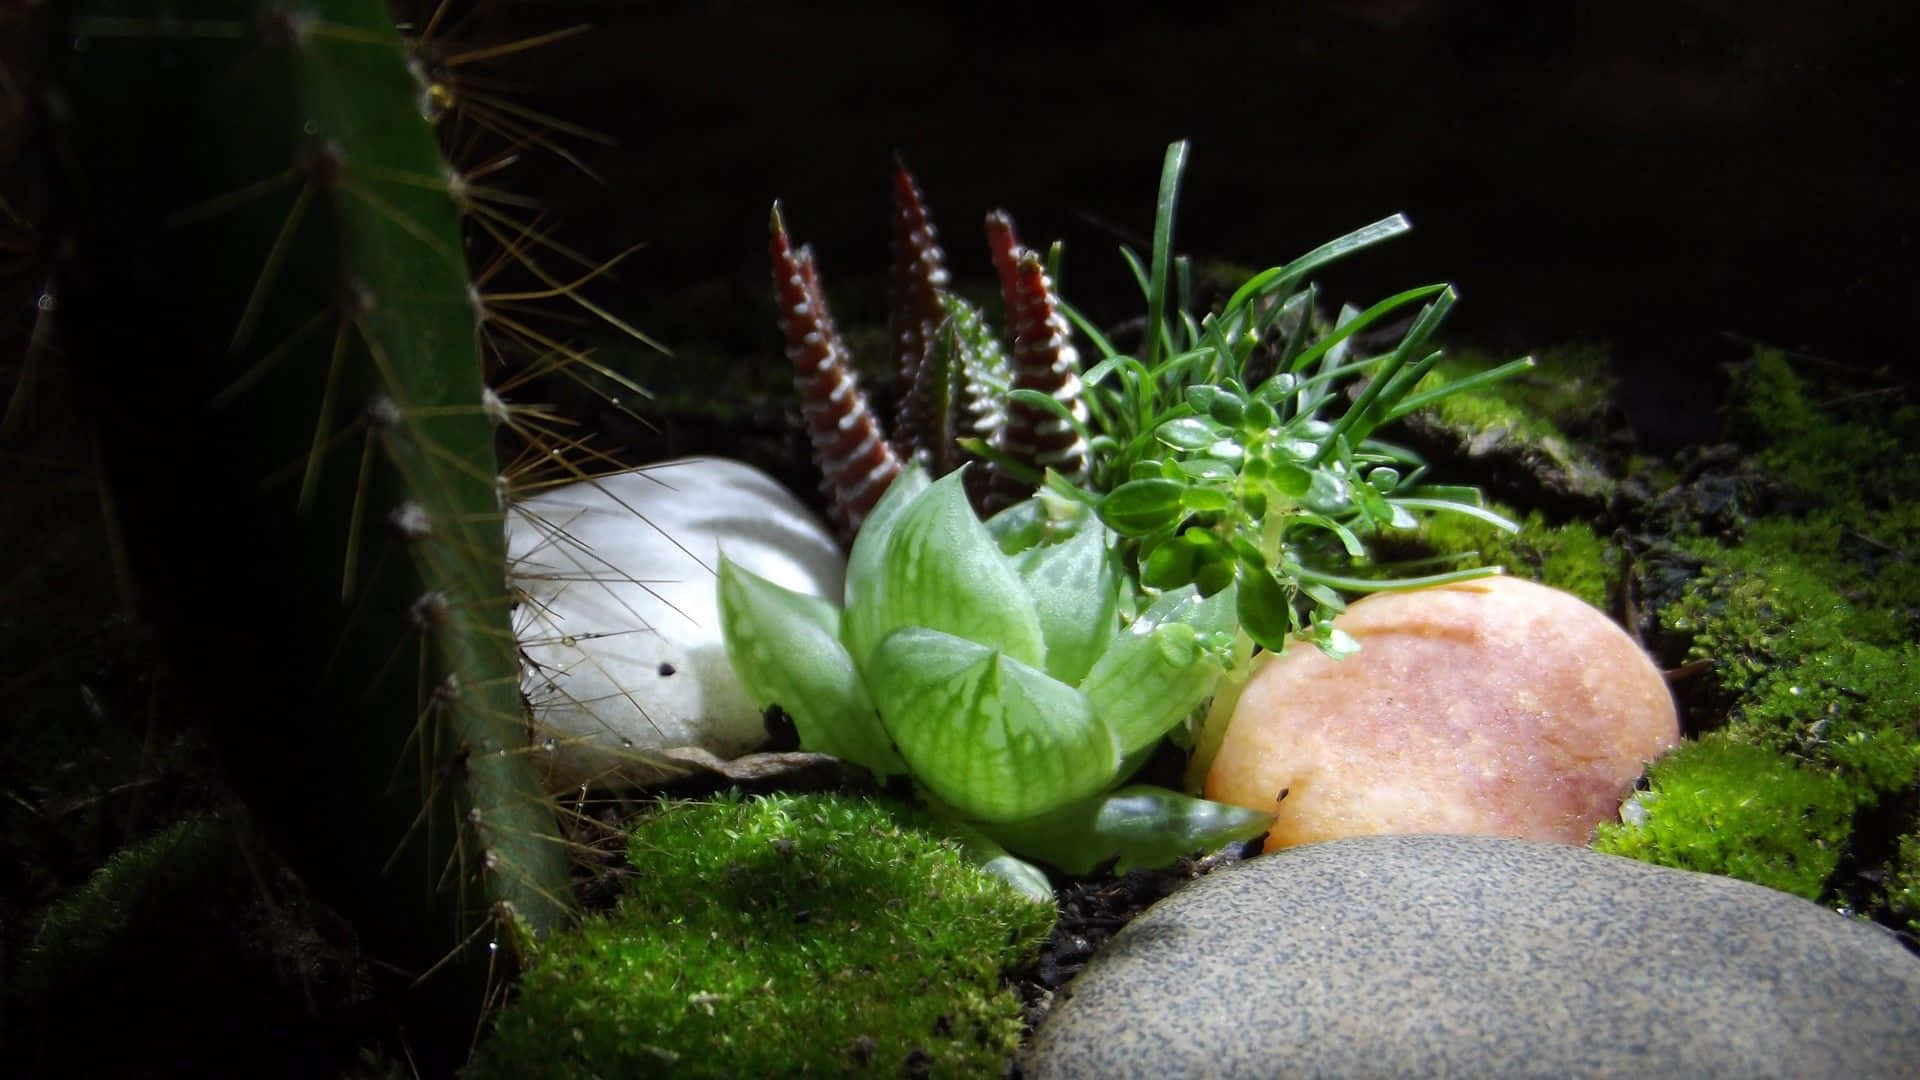 A Cactus And Rocks In A Mossy Area